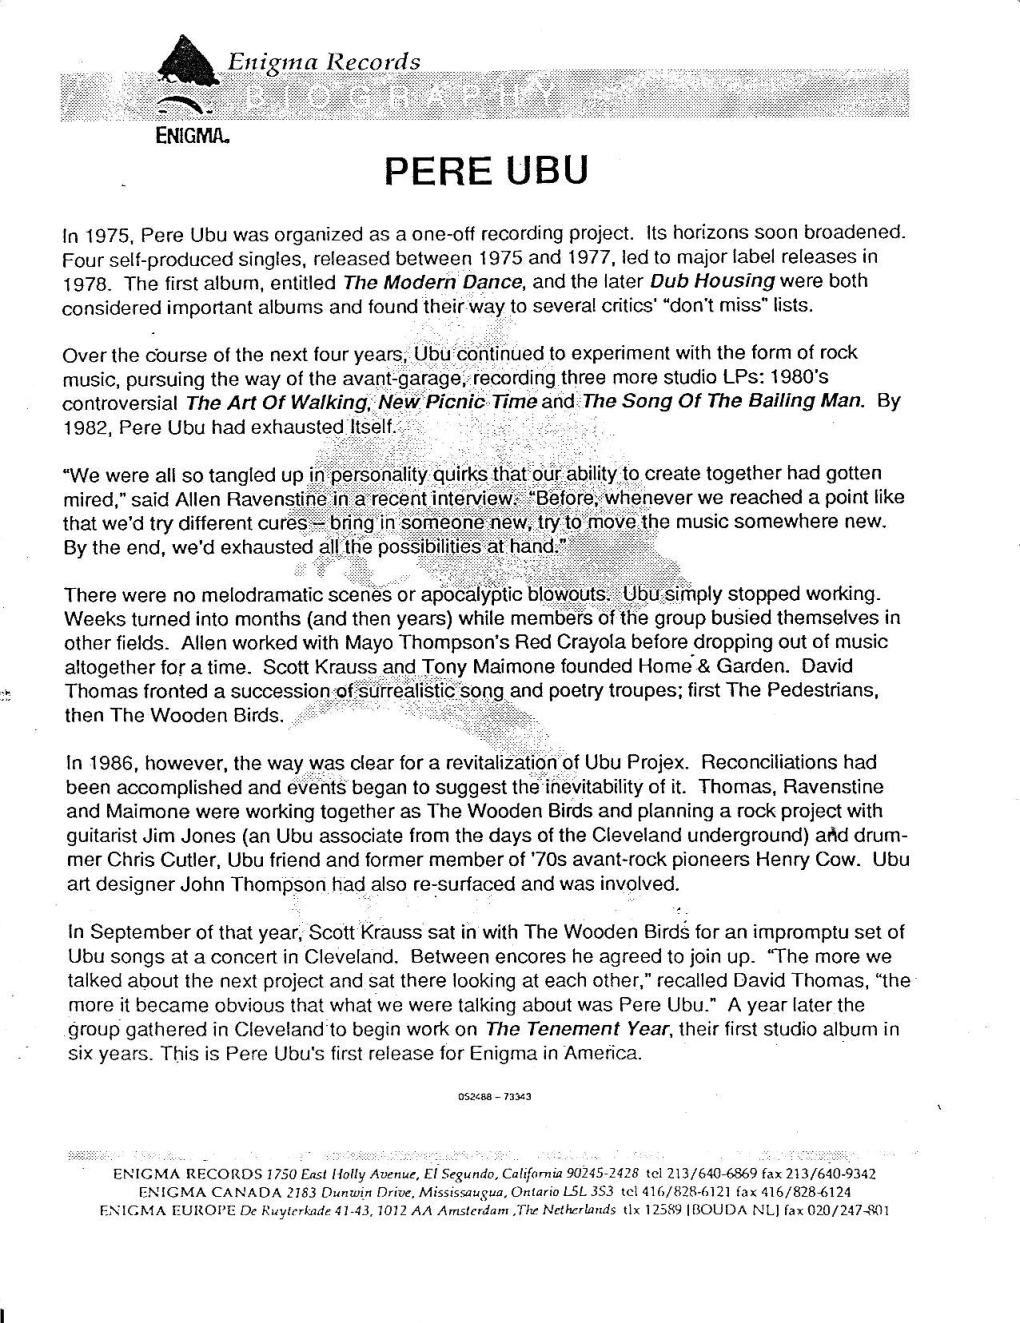 PERE UBU Ln 1975, Pere Ubu Was Organized As a One-Off Recording Project